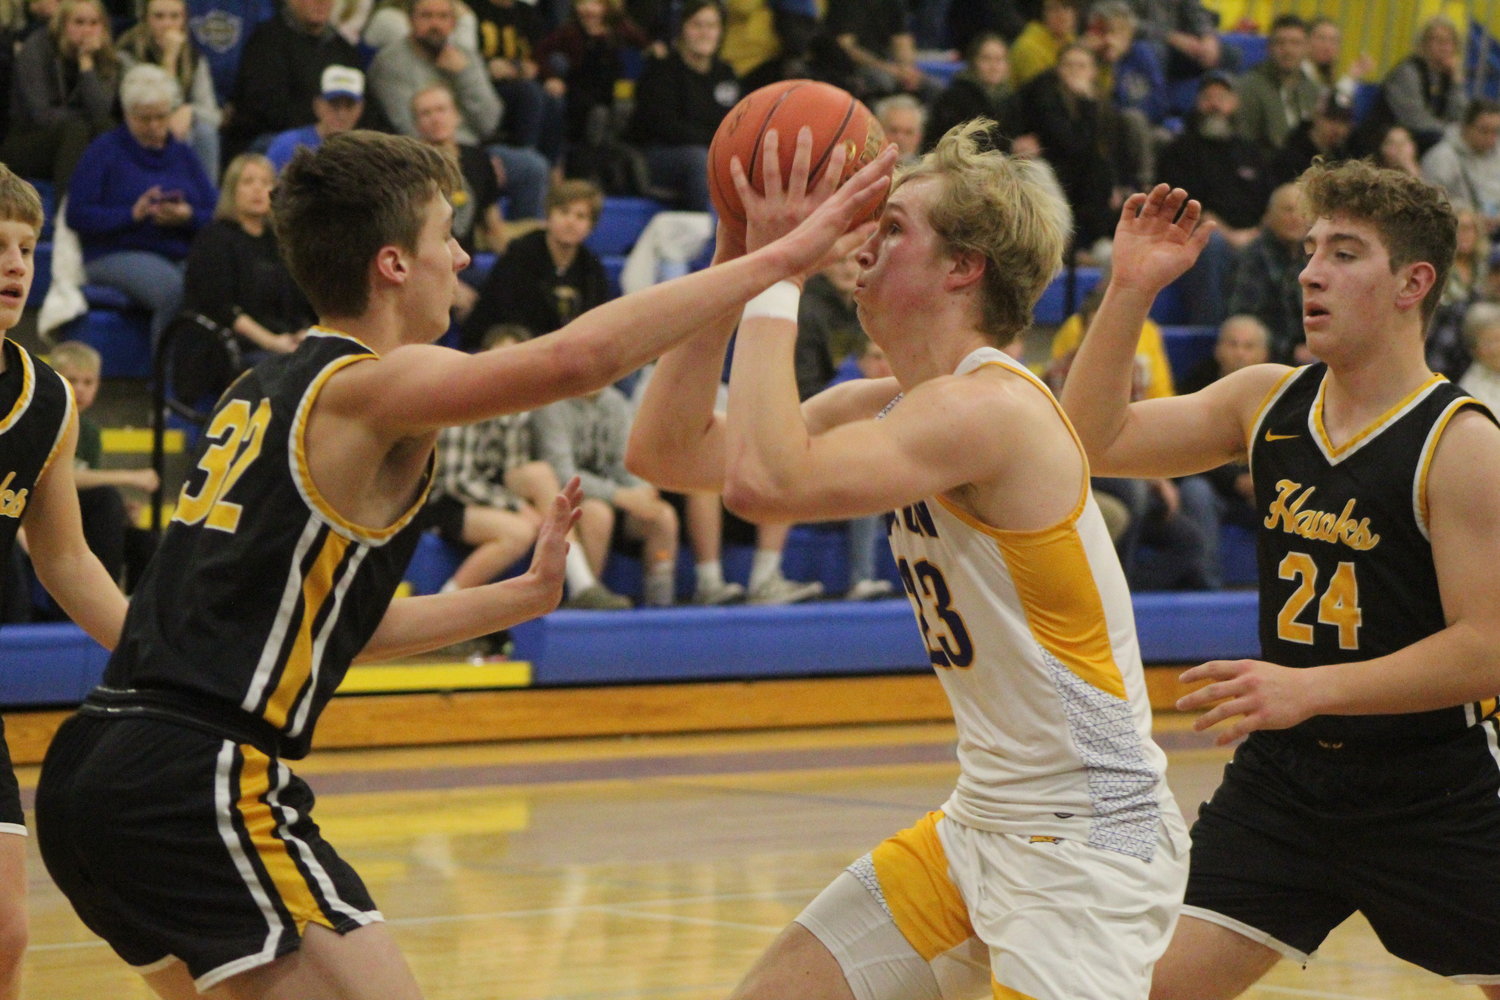 Wilton's Caden Kirkman drives into the lane against Mid-Prairie's Dylan Henry.